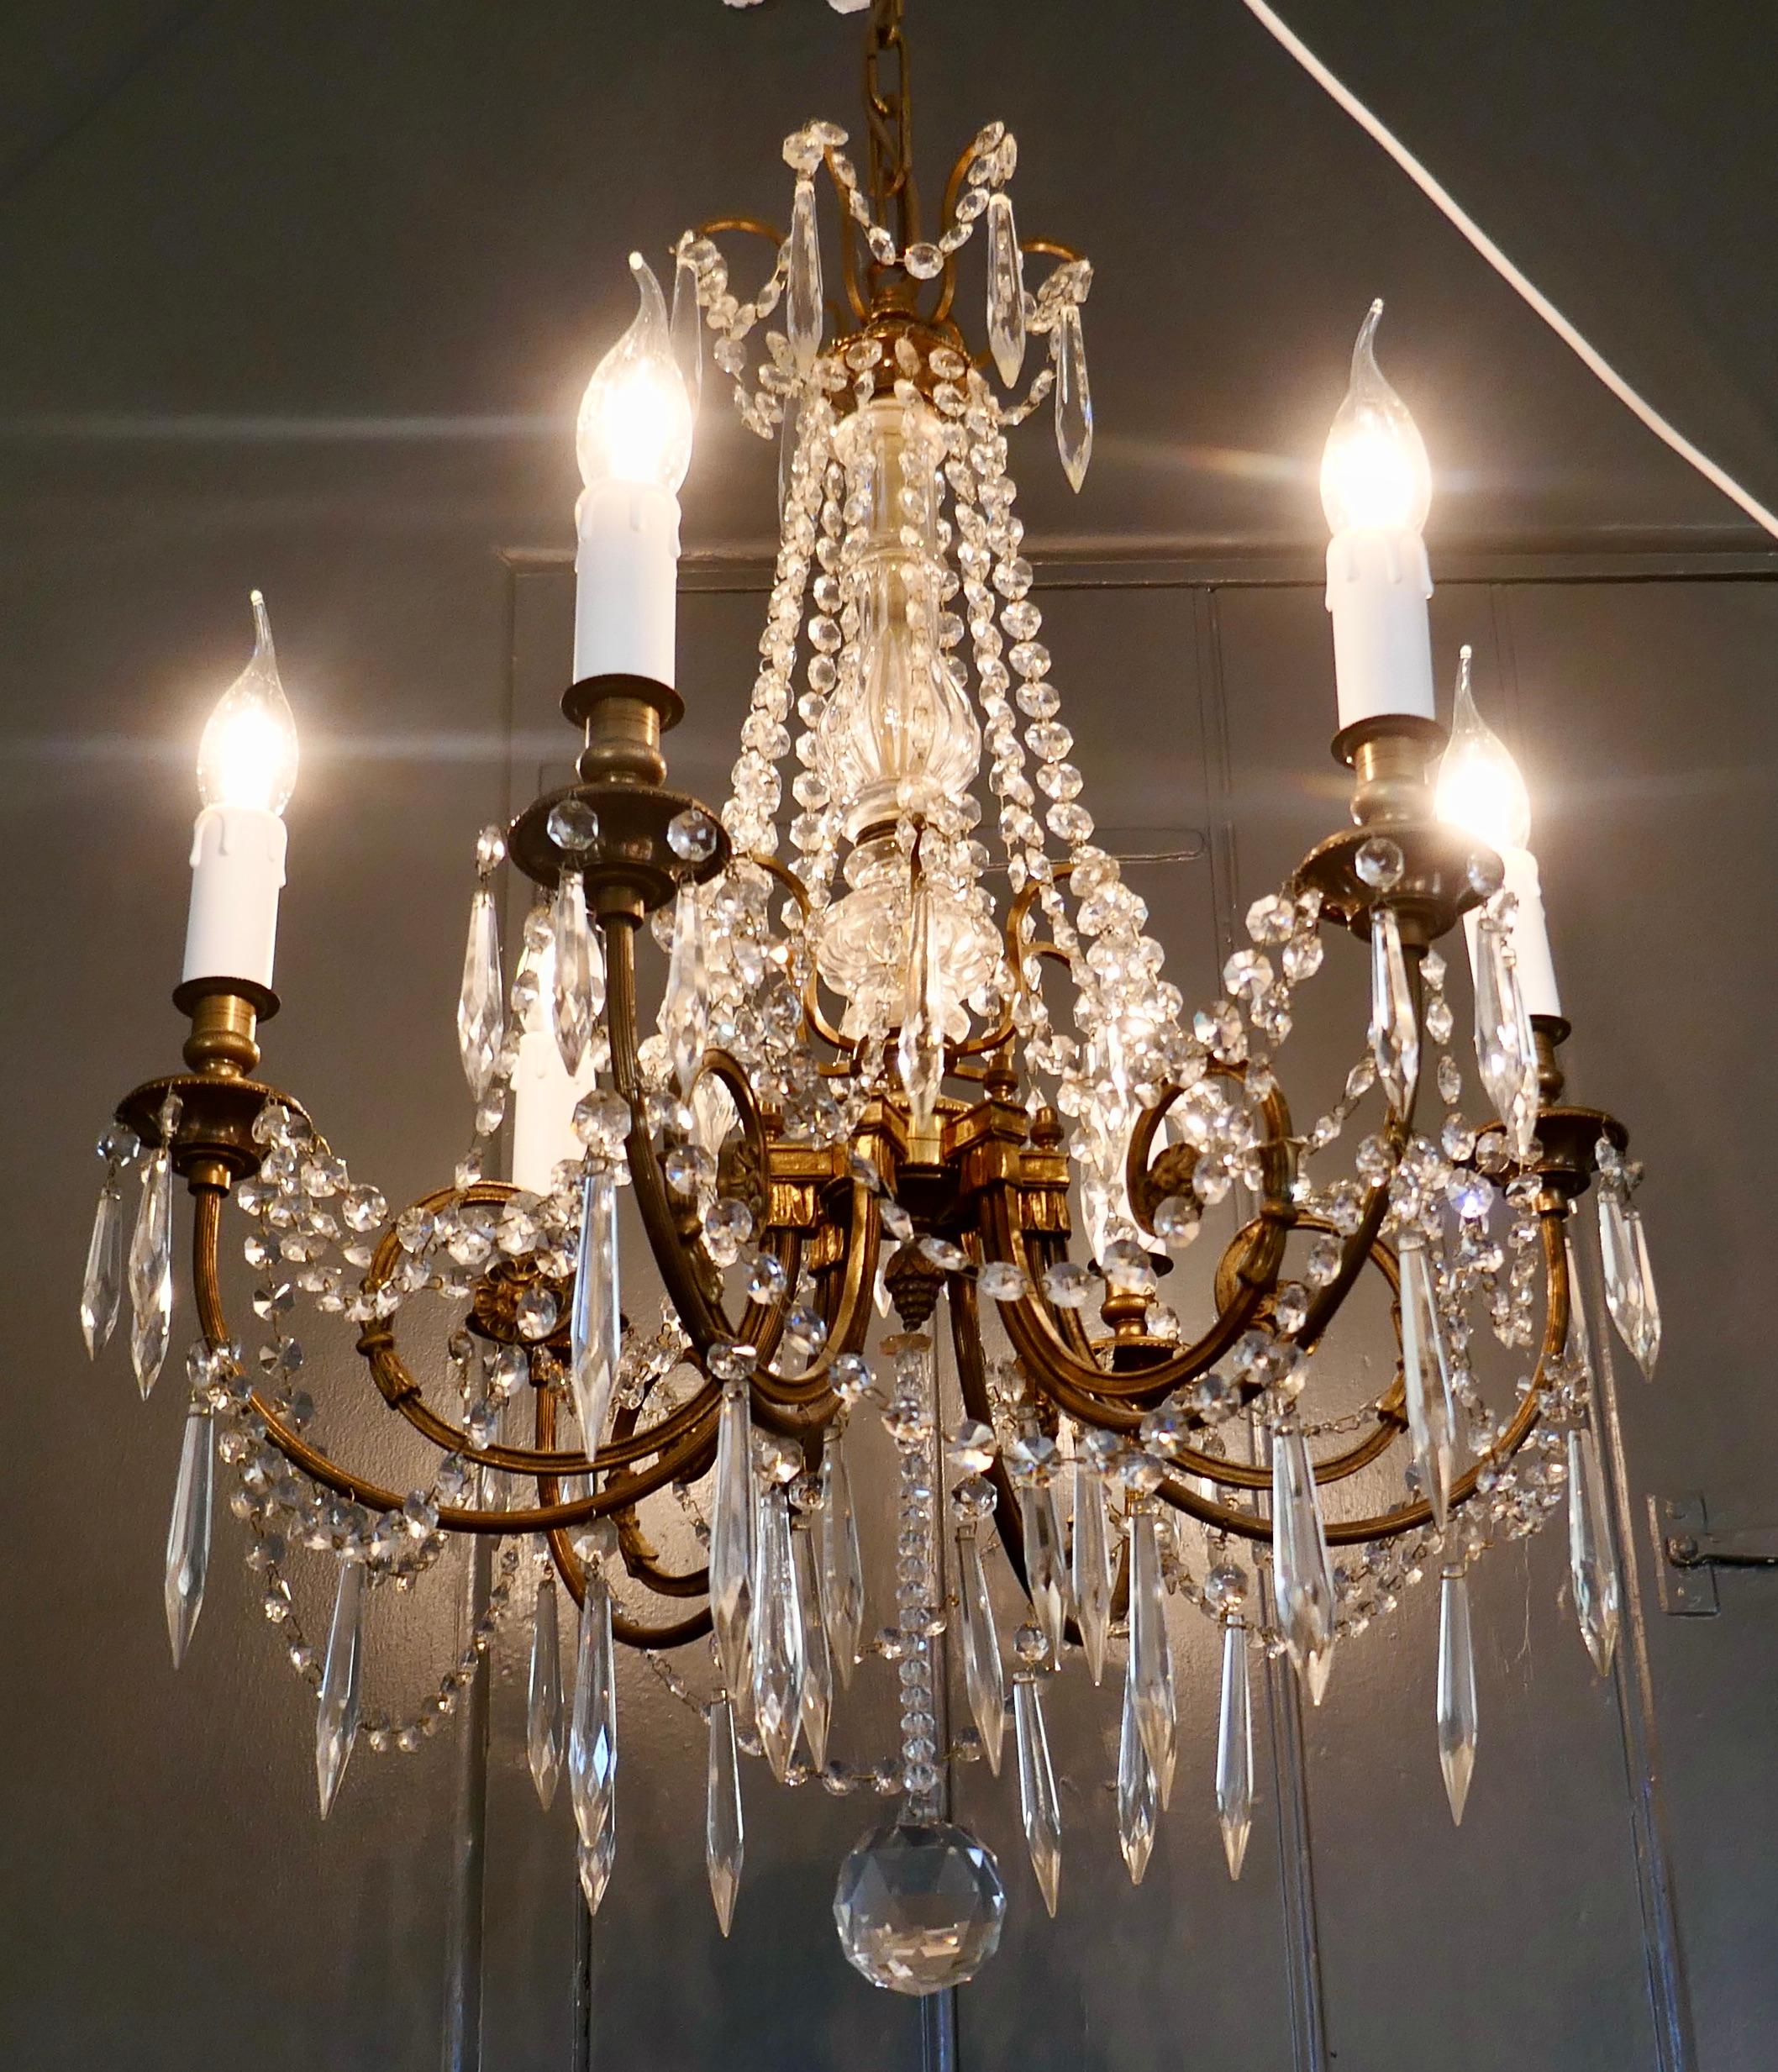 French Provincial Large French Crystal 6 Branch Salon Chandelier